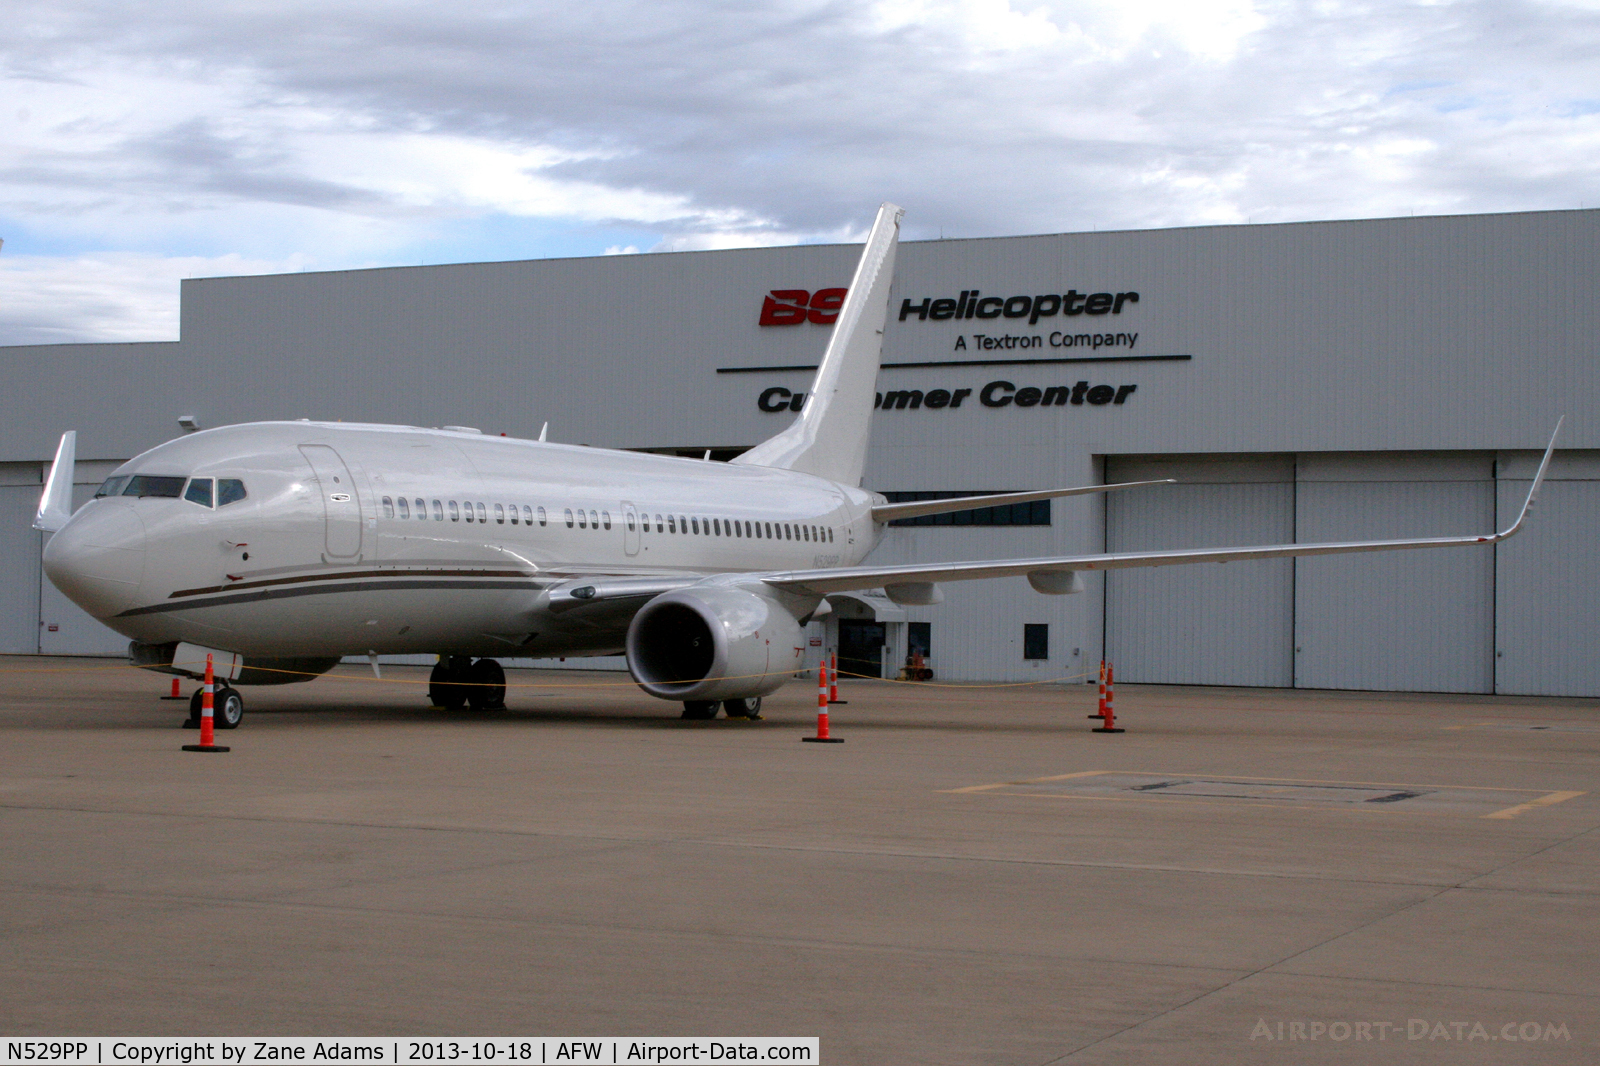 N529PP, 2007 Boeing 737-7HJ C/N 36756, On display at the 2013 Fort Worth Alliance Airshow